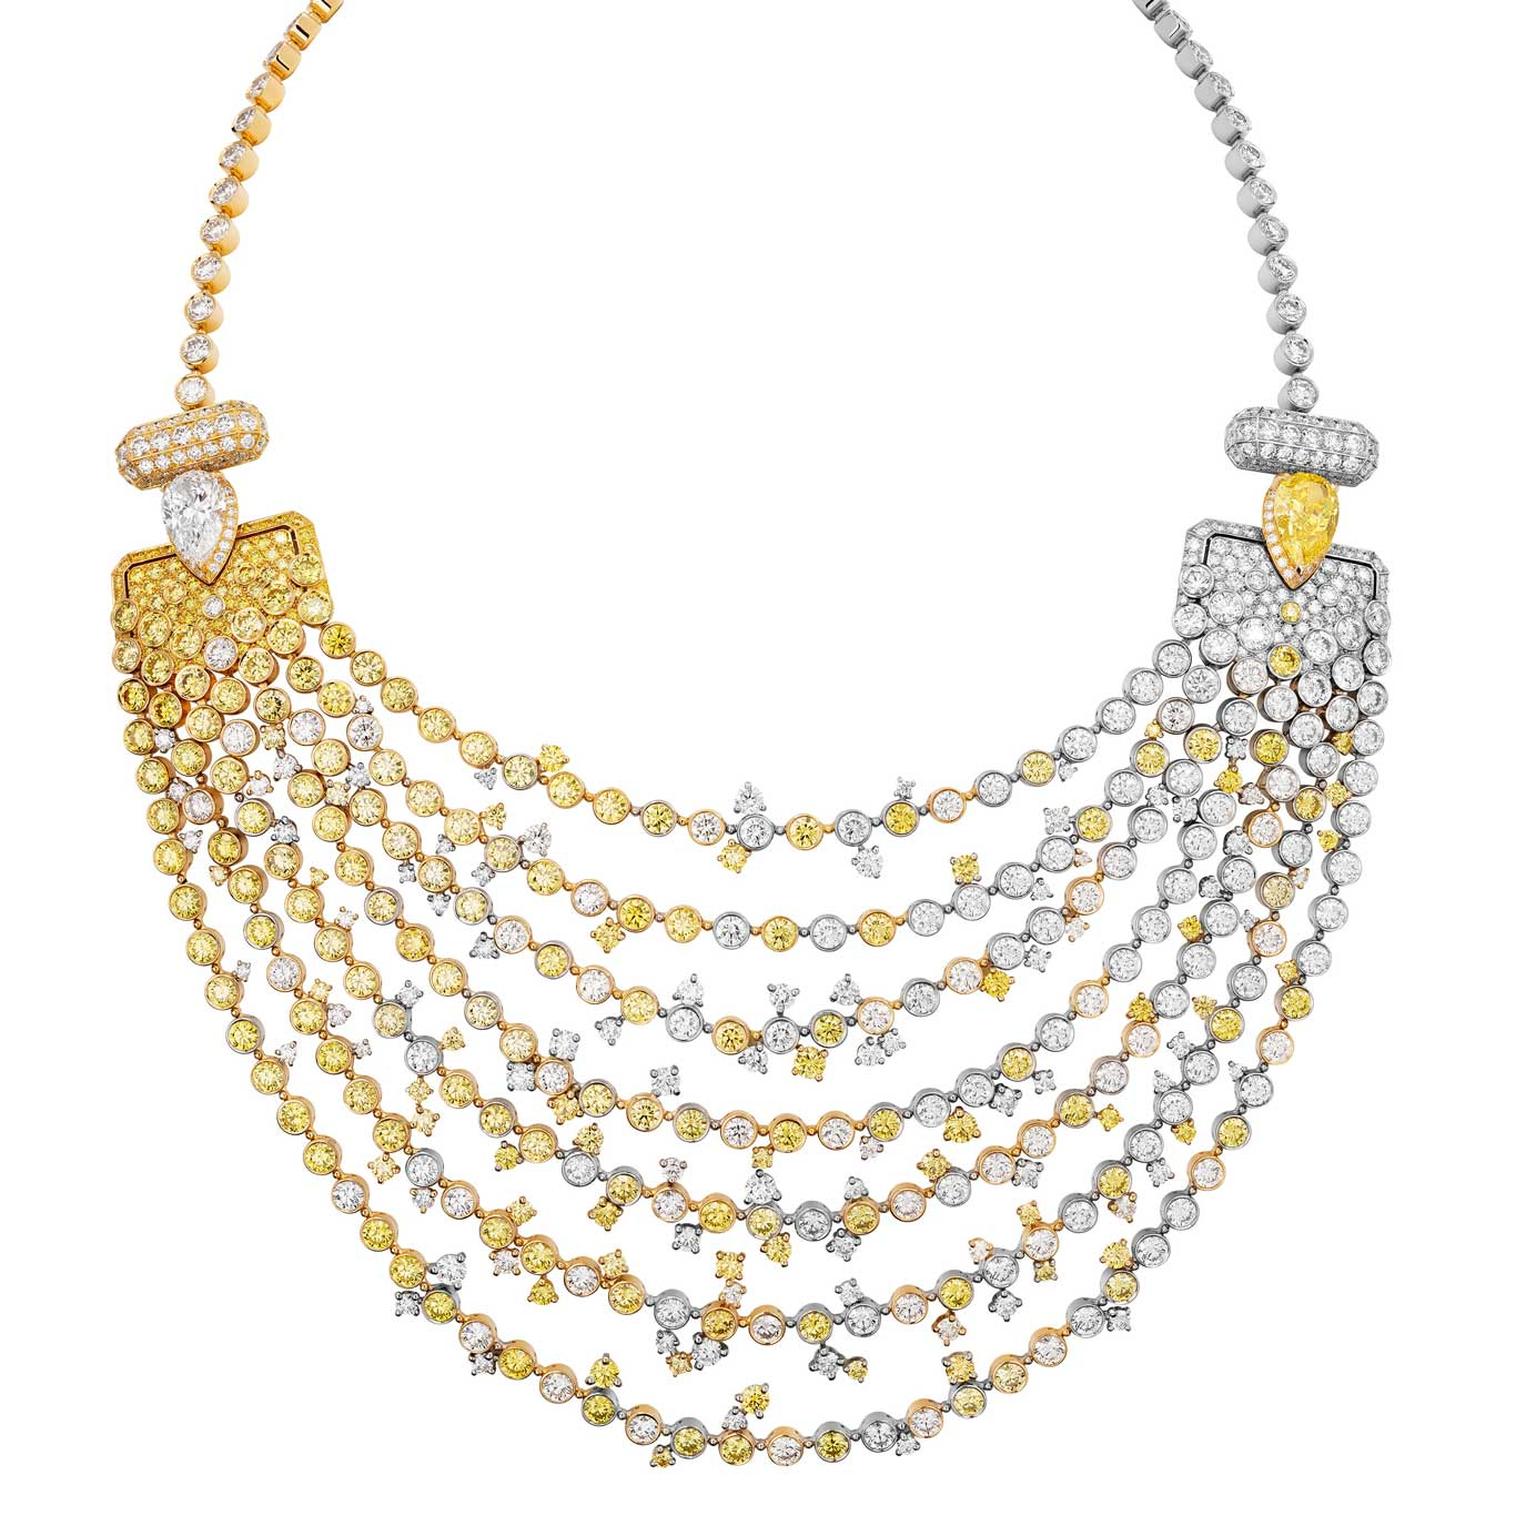 Chanel Collection No 5 ABSTRACTION necklace 